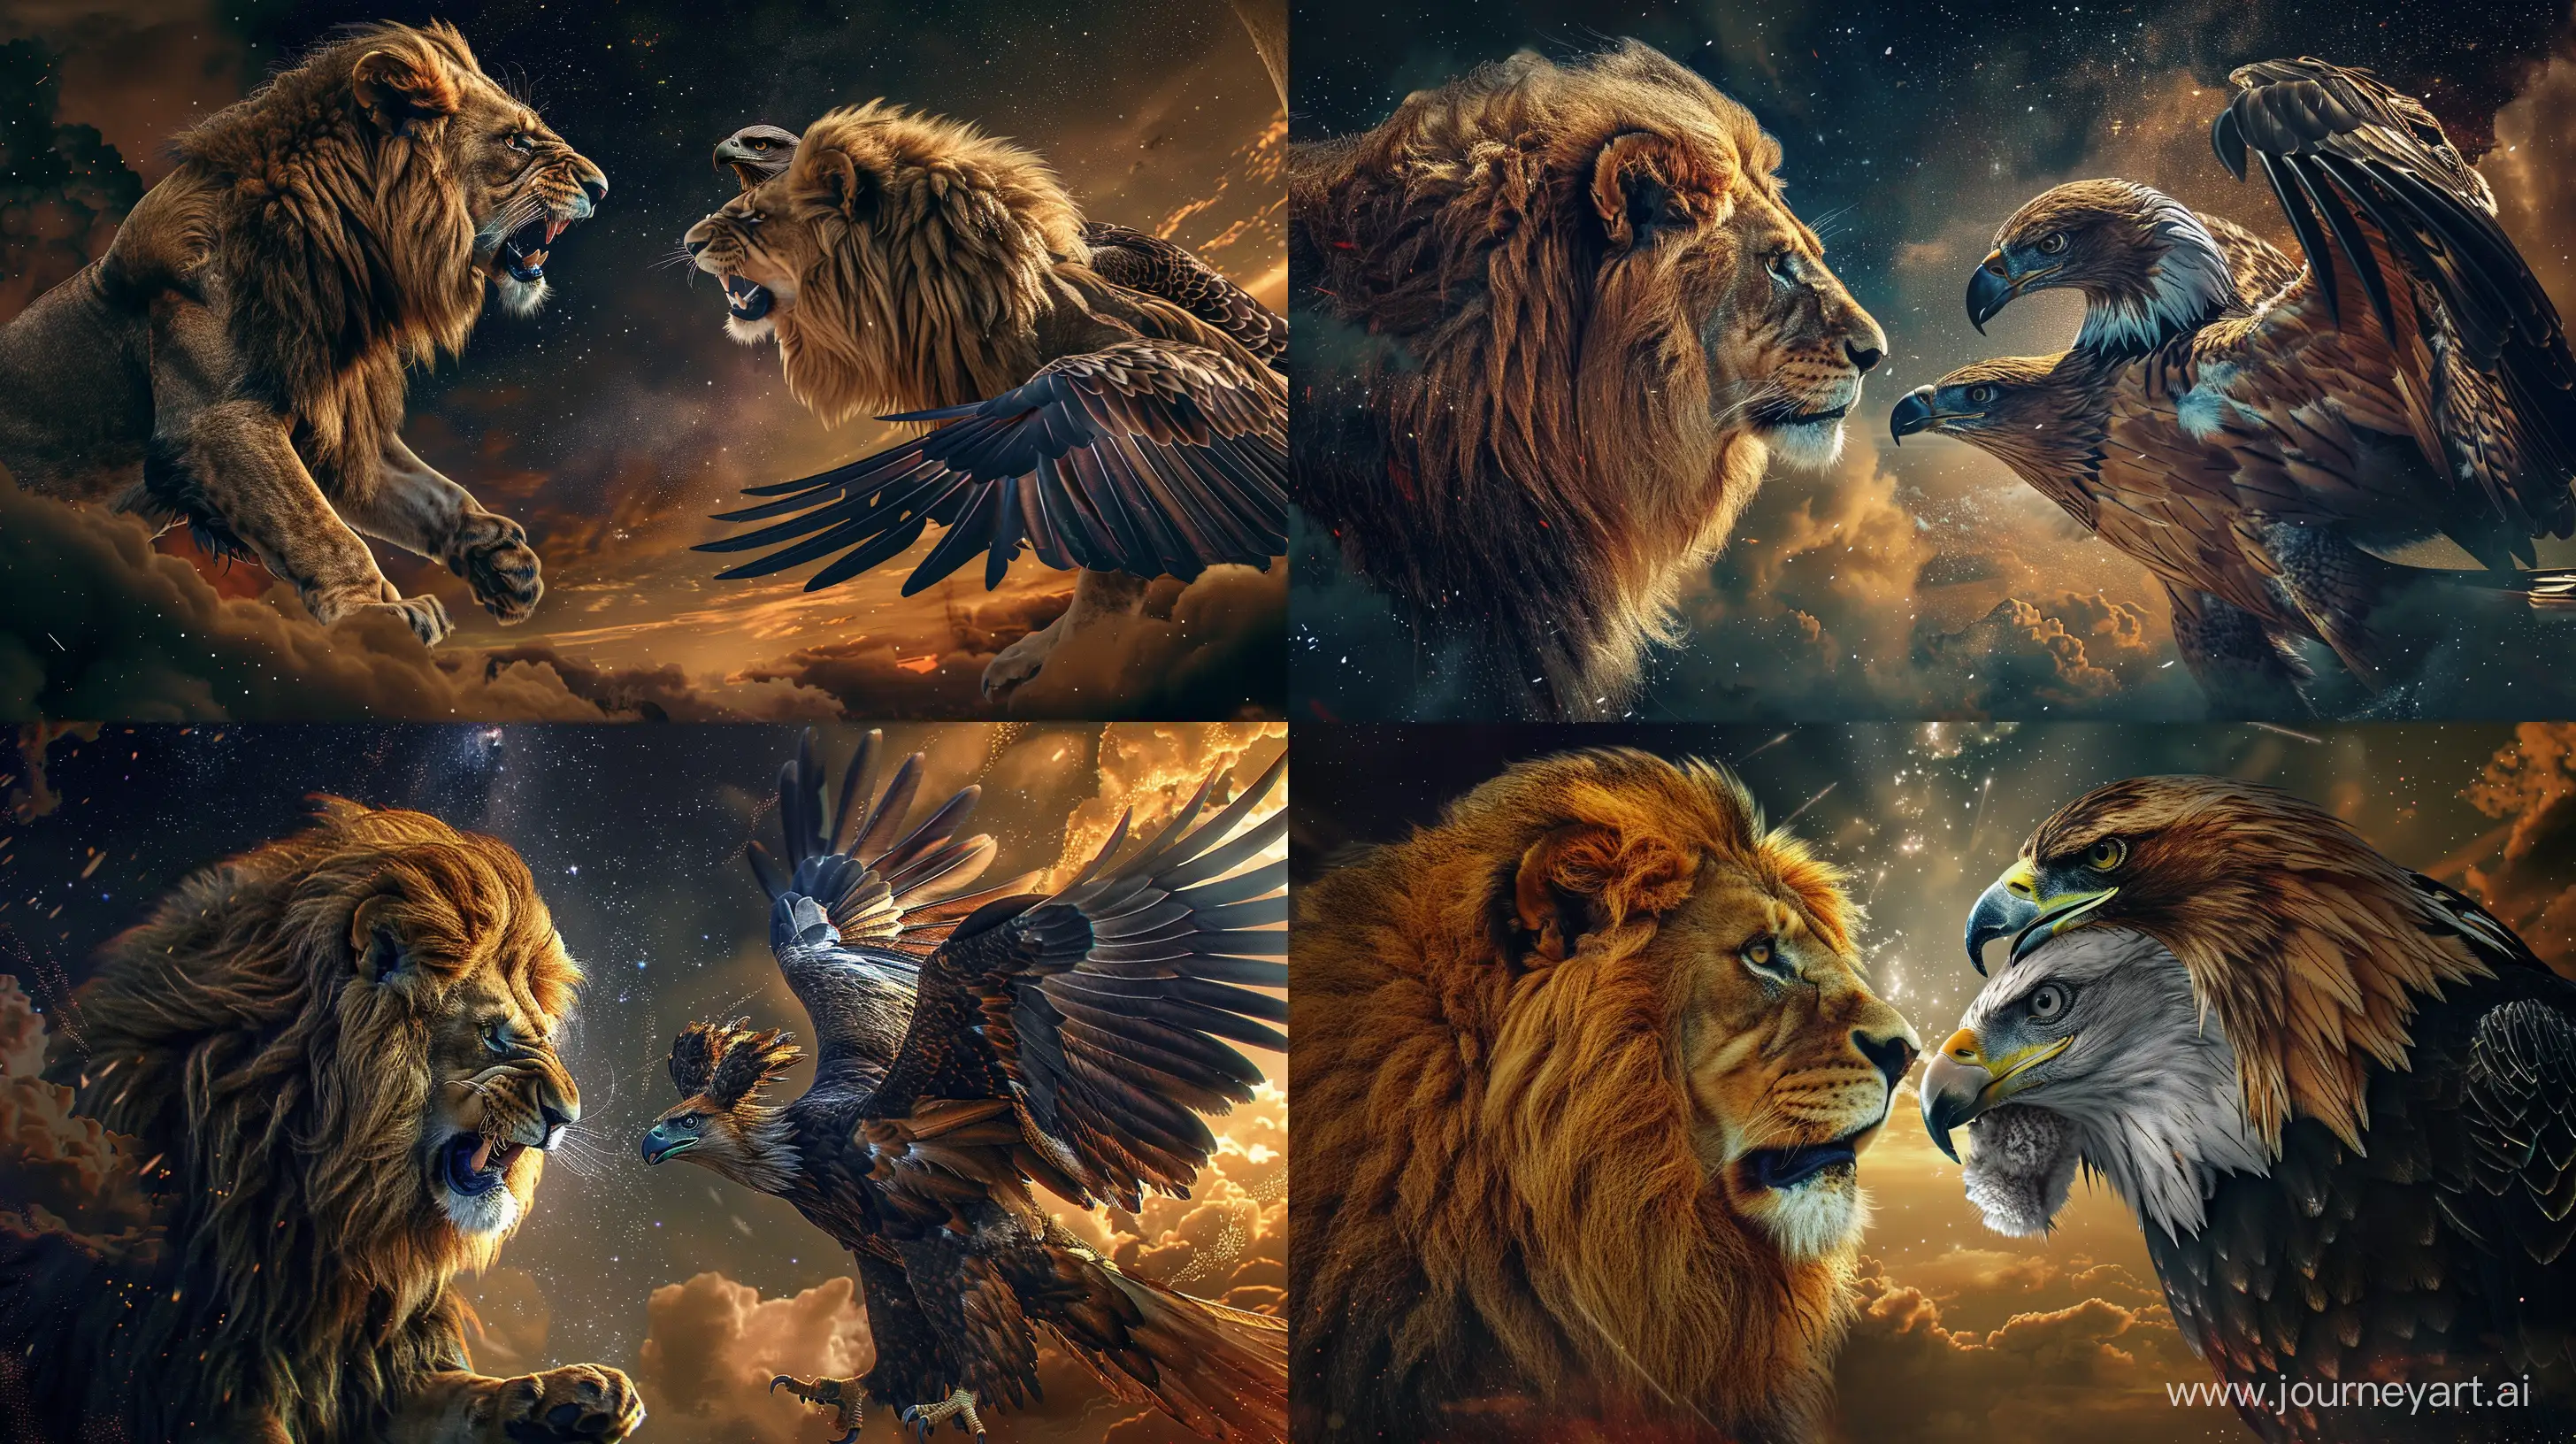 Realistic lion and eagle(double-headed eagle) facing off, about to clash, fierce expressions, intricate details, close up image, celestial sky background, high resolution 8k --ar 16:9